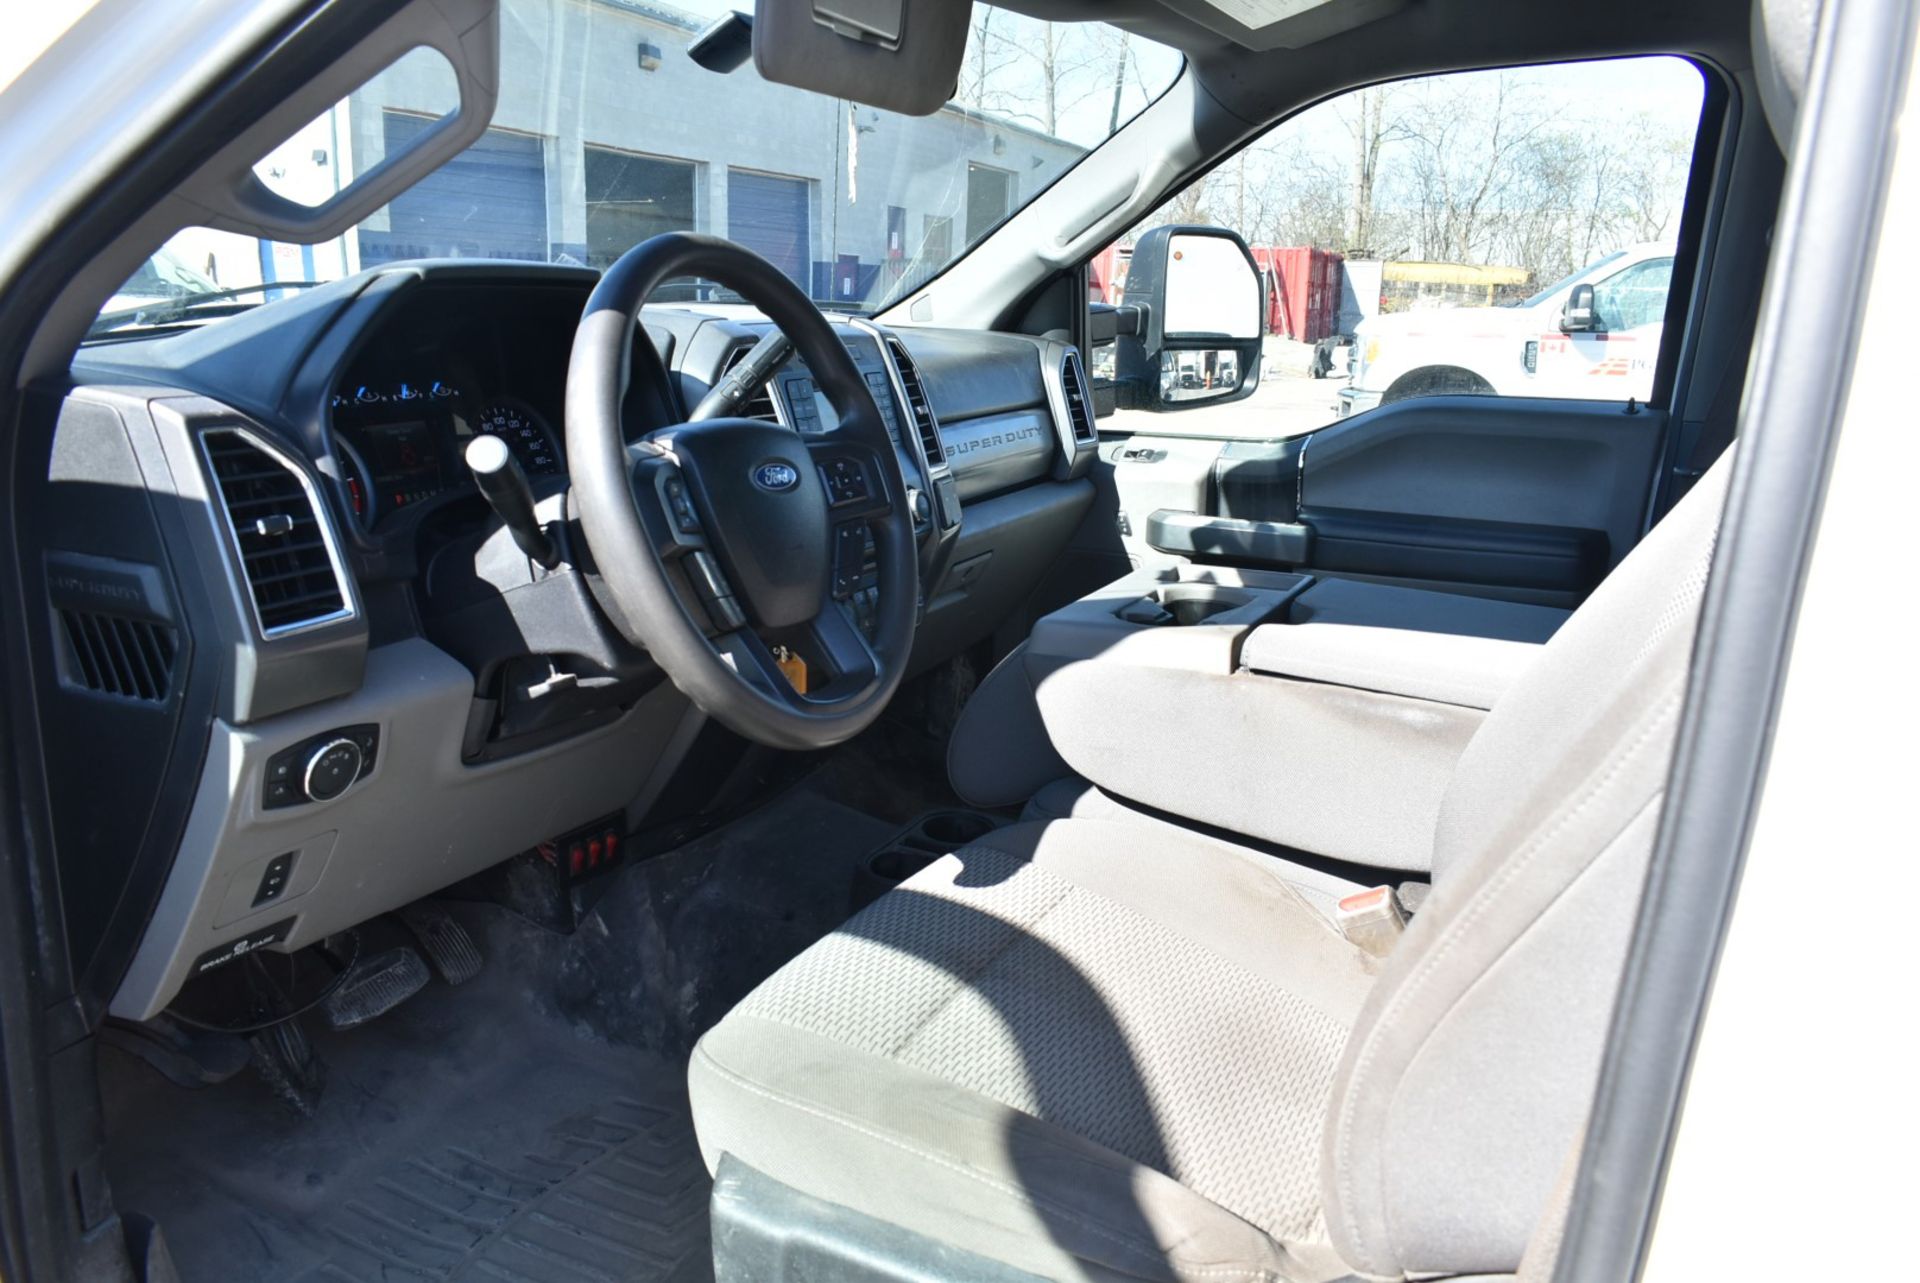 FORD (2017) F250 XLT SUPER DUTY CREW CAB PICKUP TRUCK WITH 6.2L 8 CYL. GAS ENGINE, AUTO. - Image 10 of 15